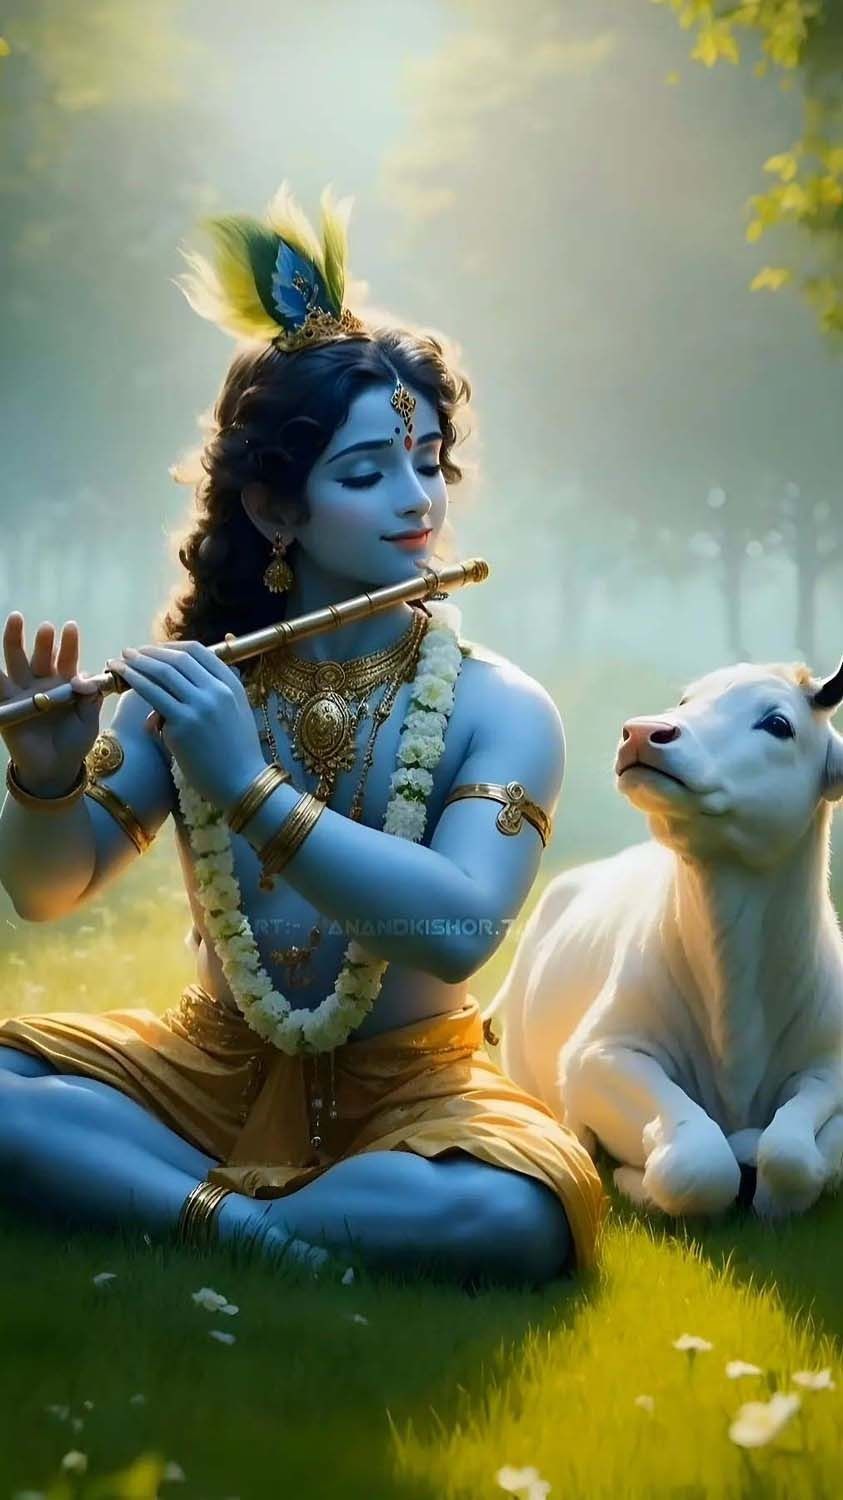 Krishna with Nandi By anandkishor74 iPhone Wallpaper HD